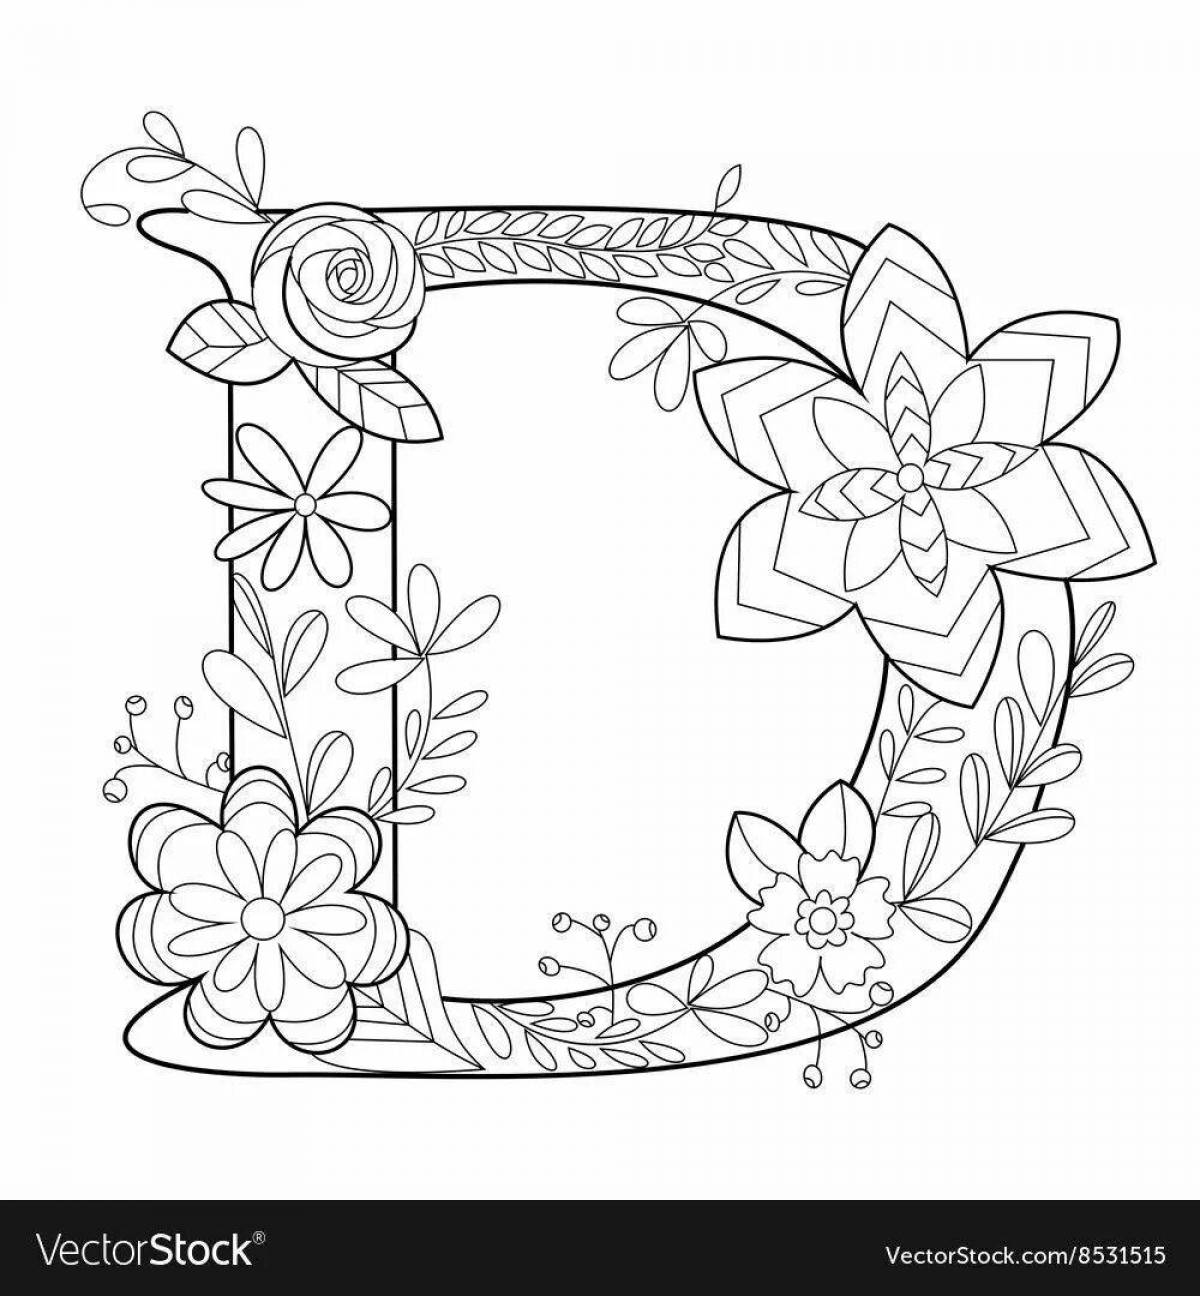 Dazzling letter c with flowers